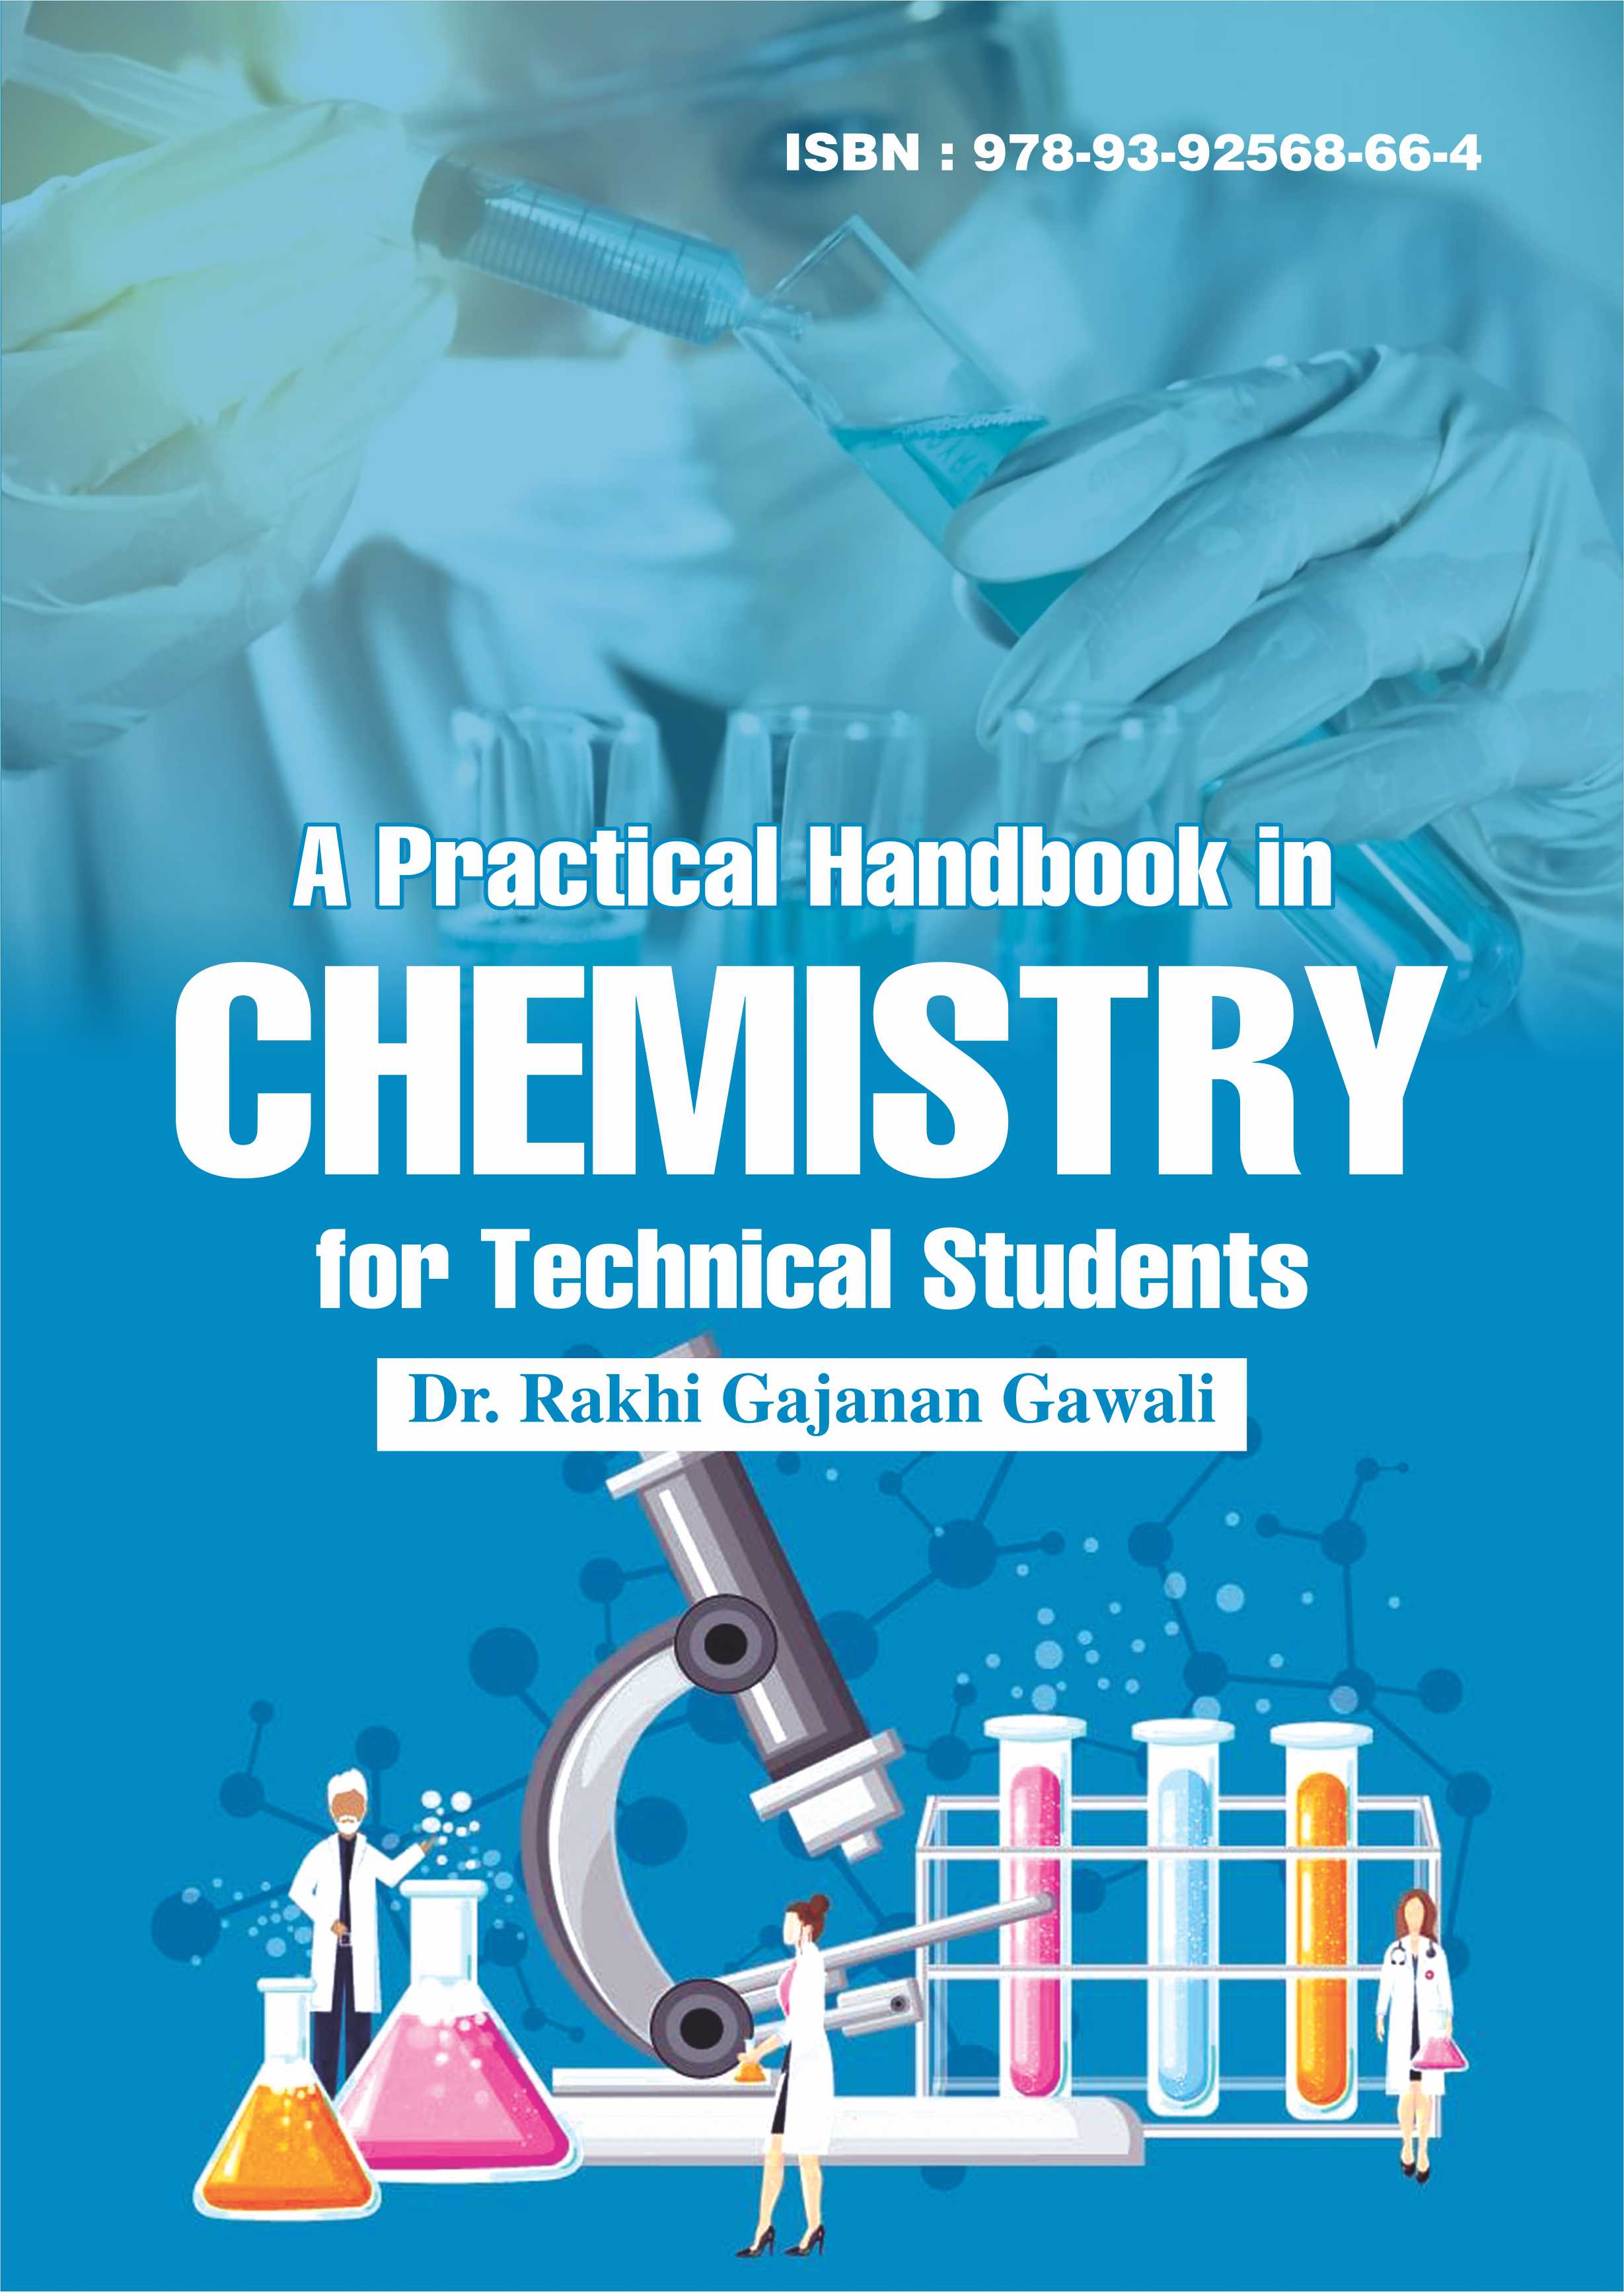 A Practical Handbook in Chemistry for Technical Students